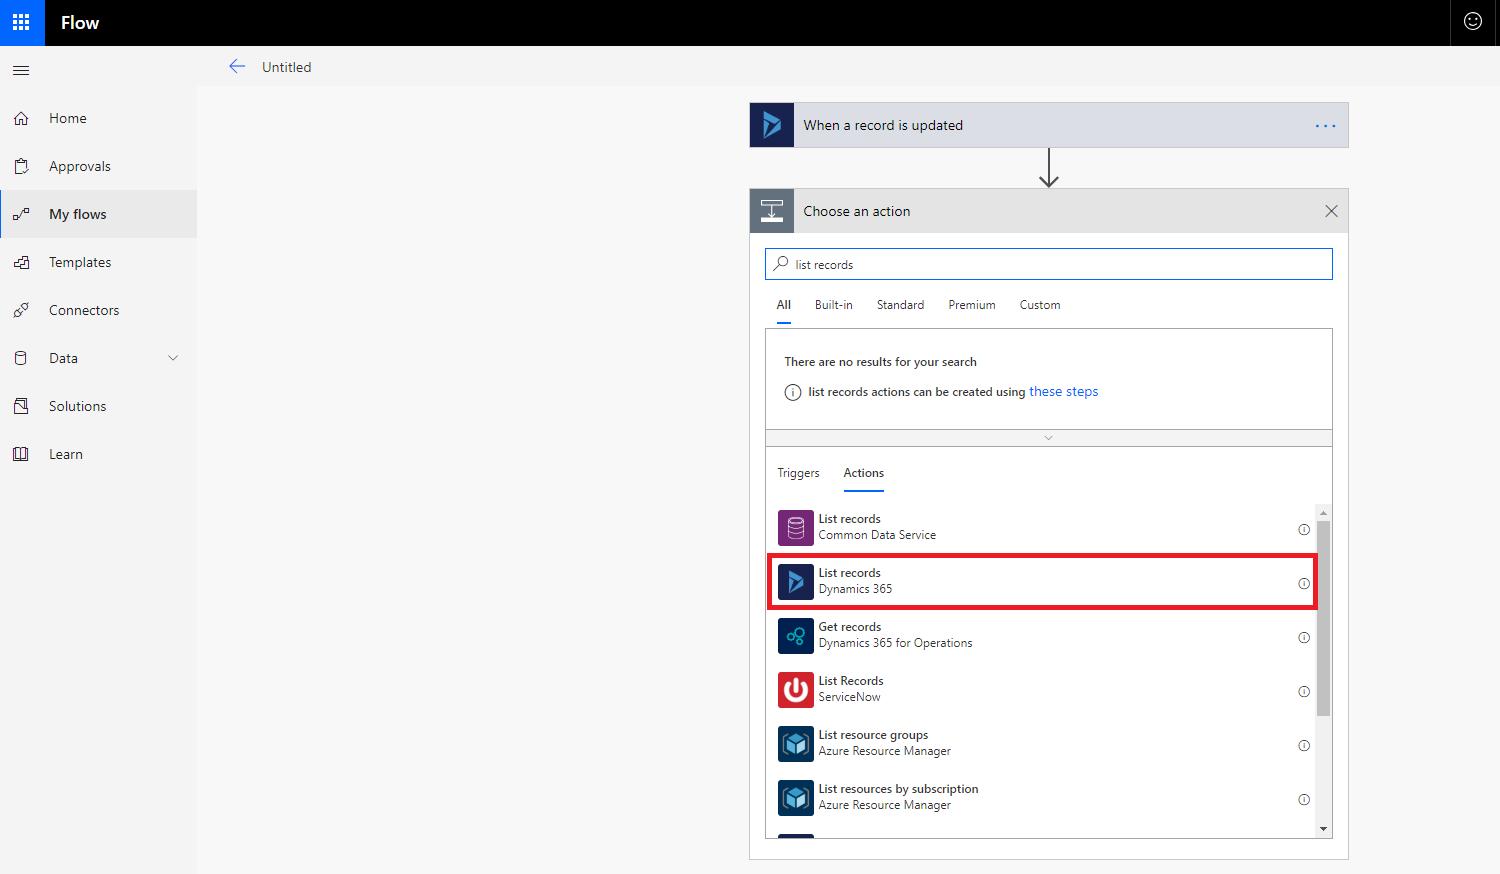 How to select list records in Microsoft Flow